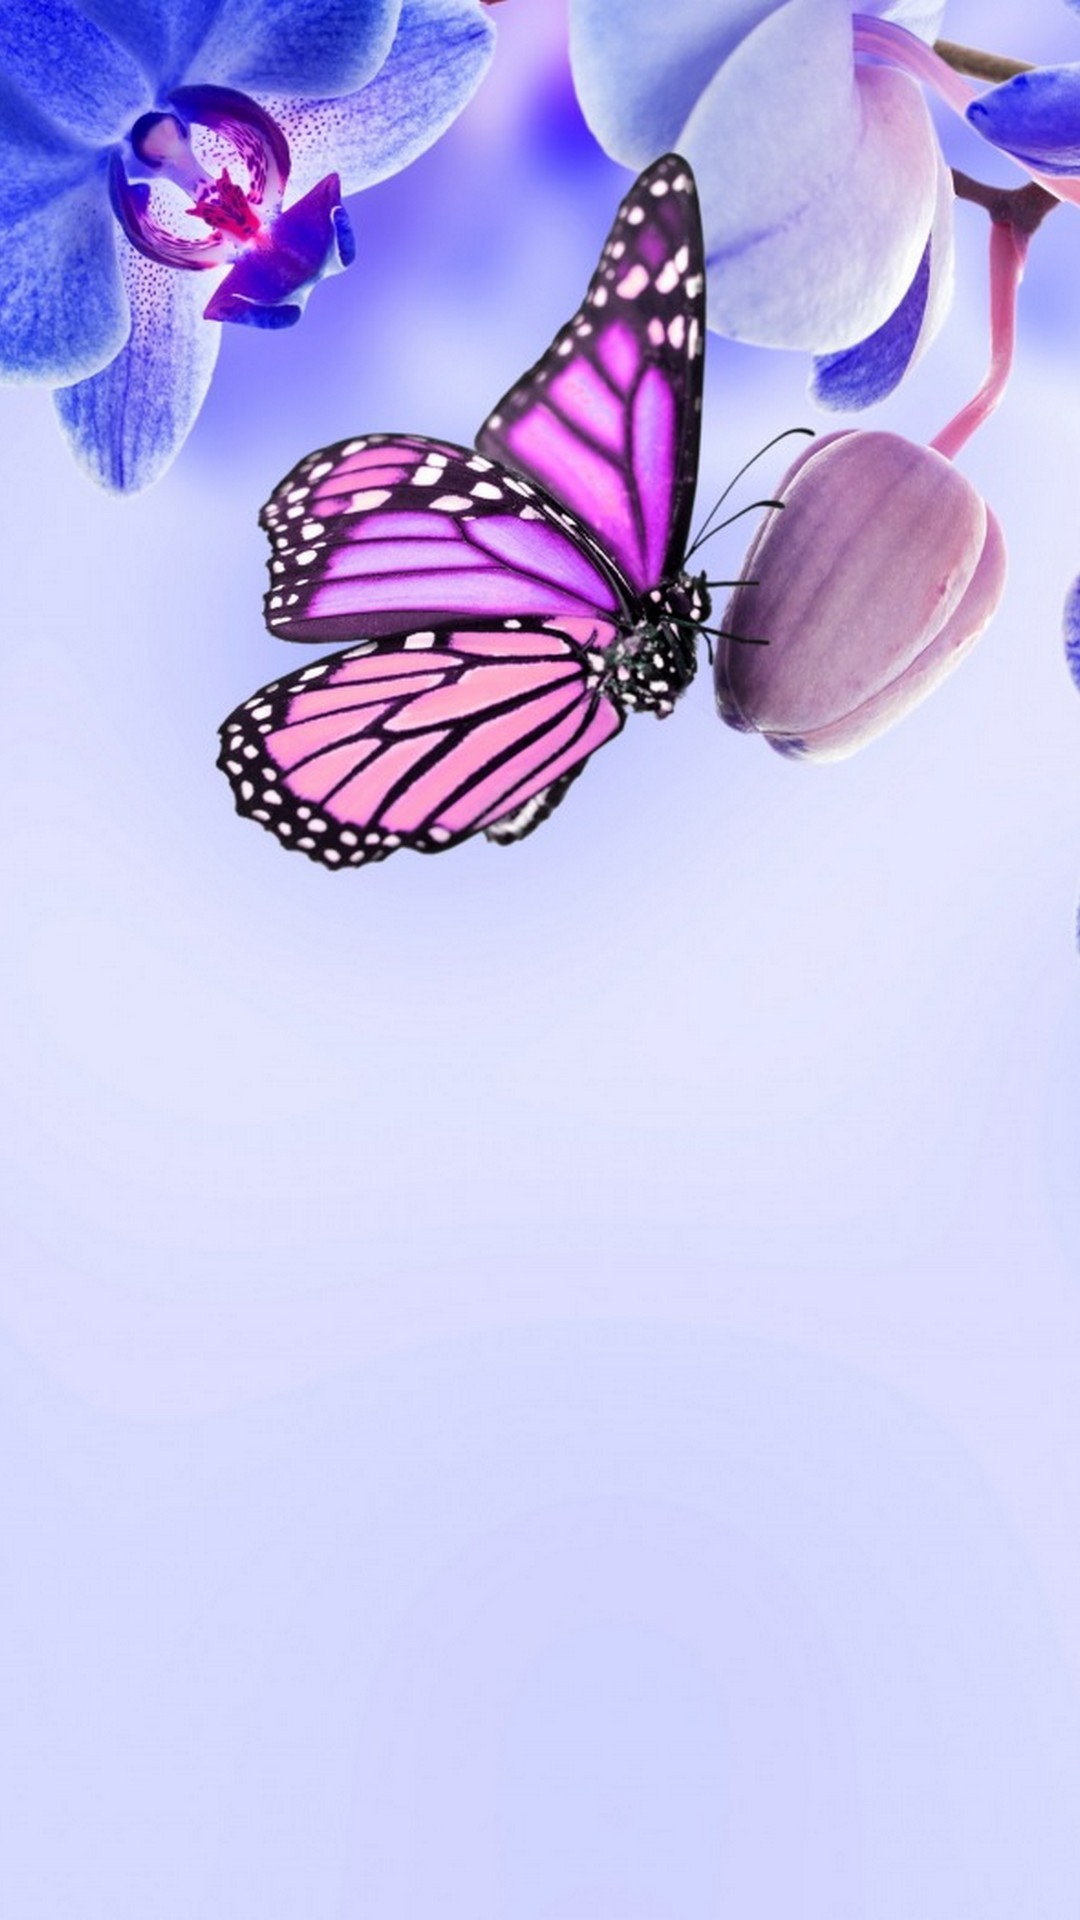 Purple Butterfly Android Wallpaper with HD resolution 1080x1920